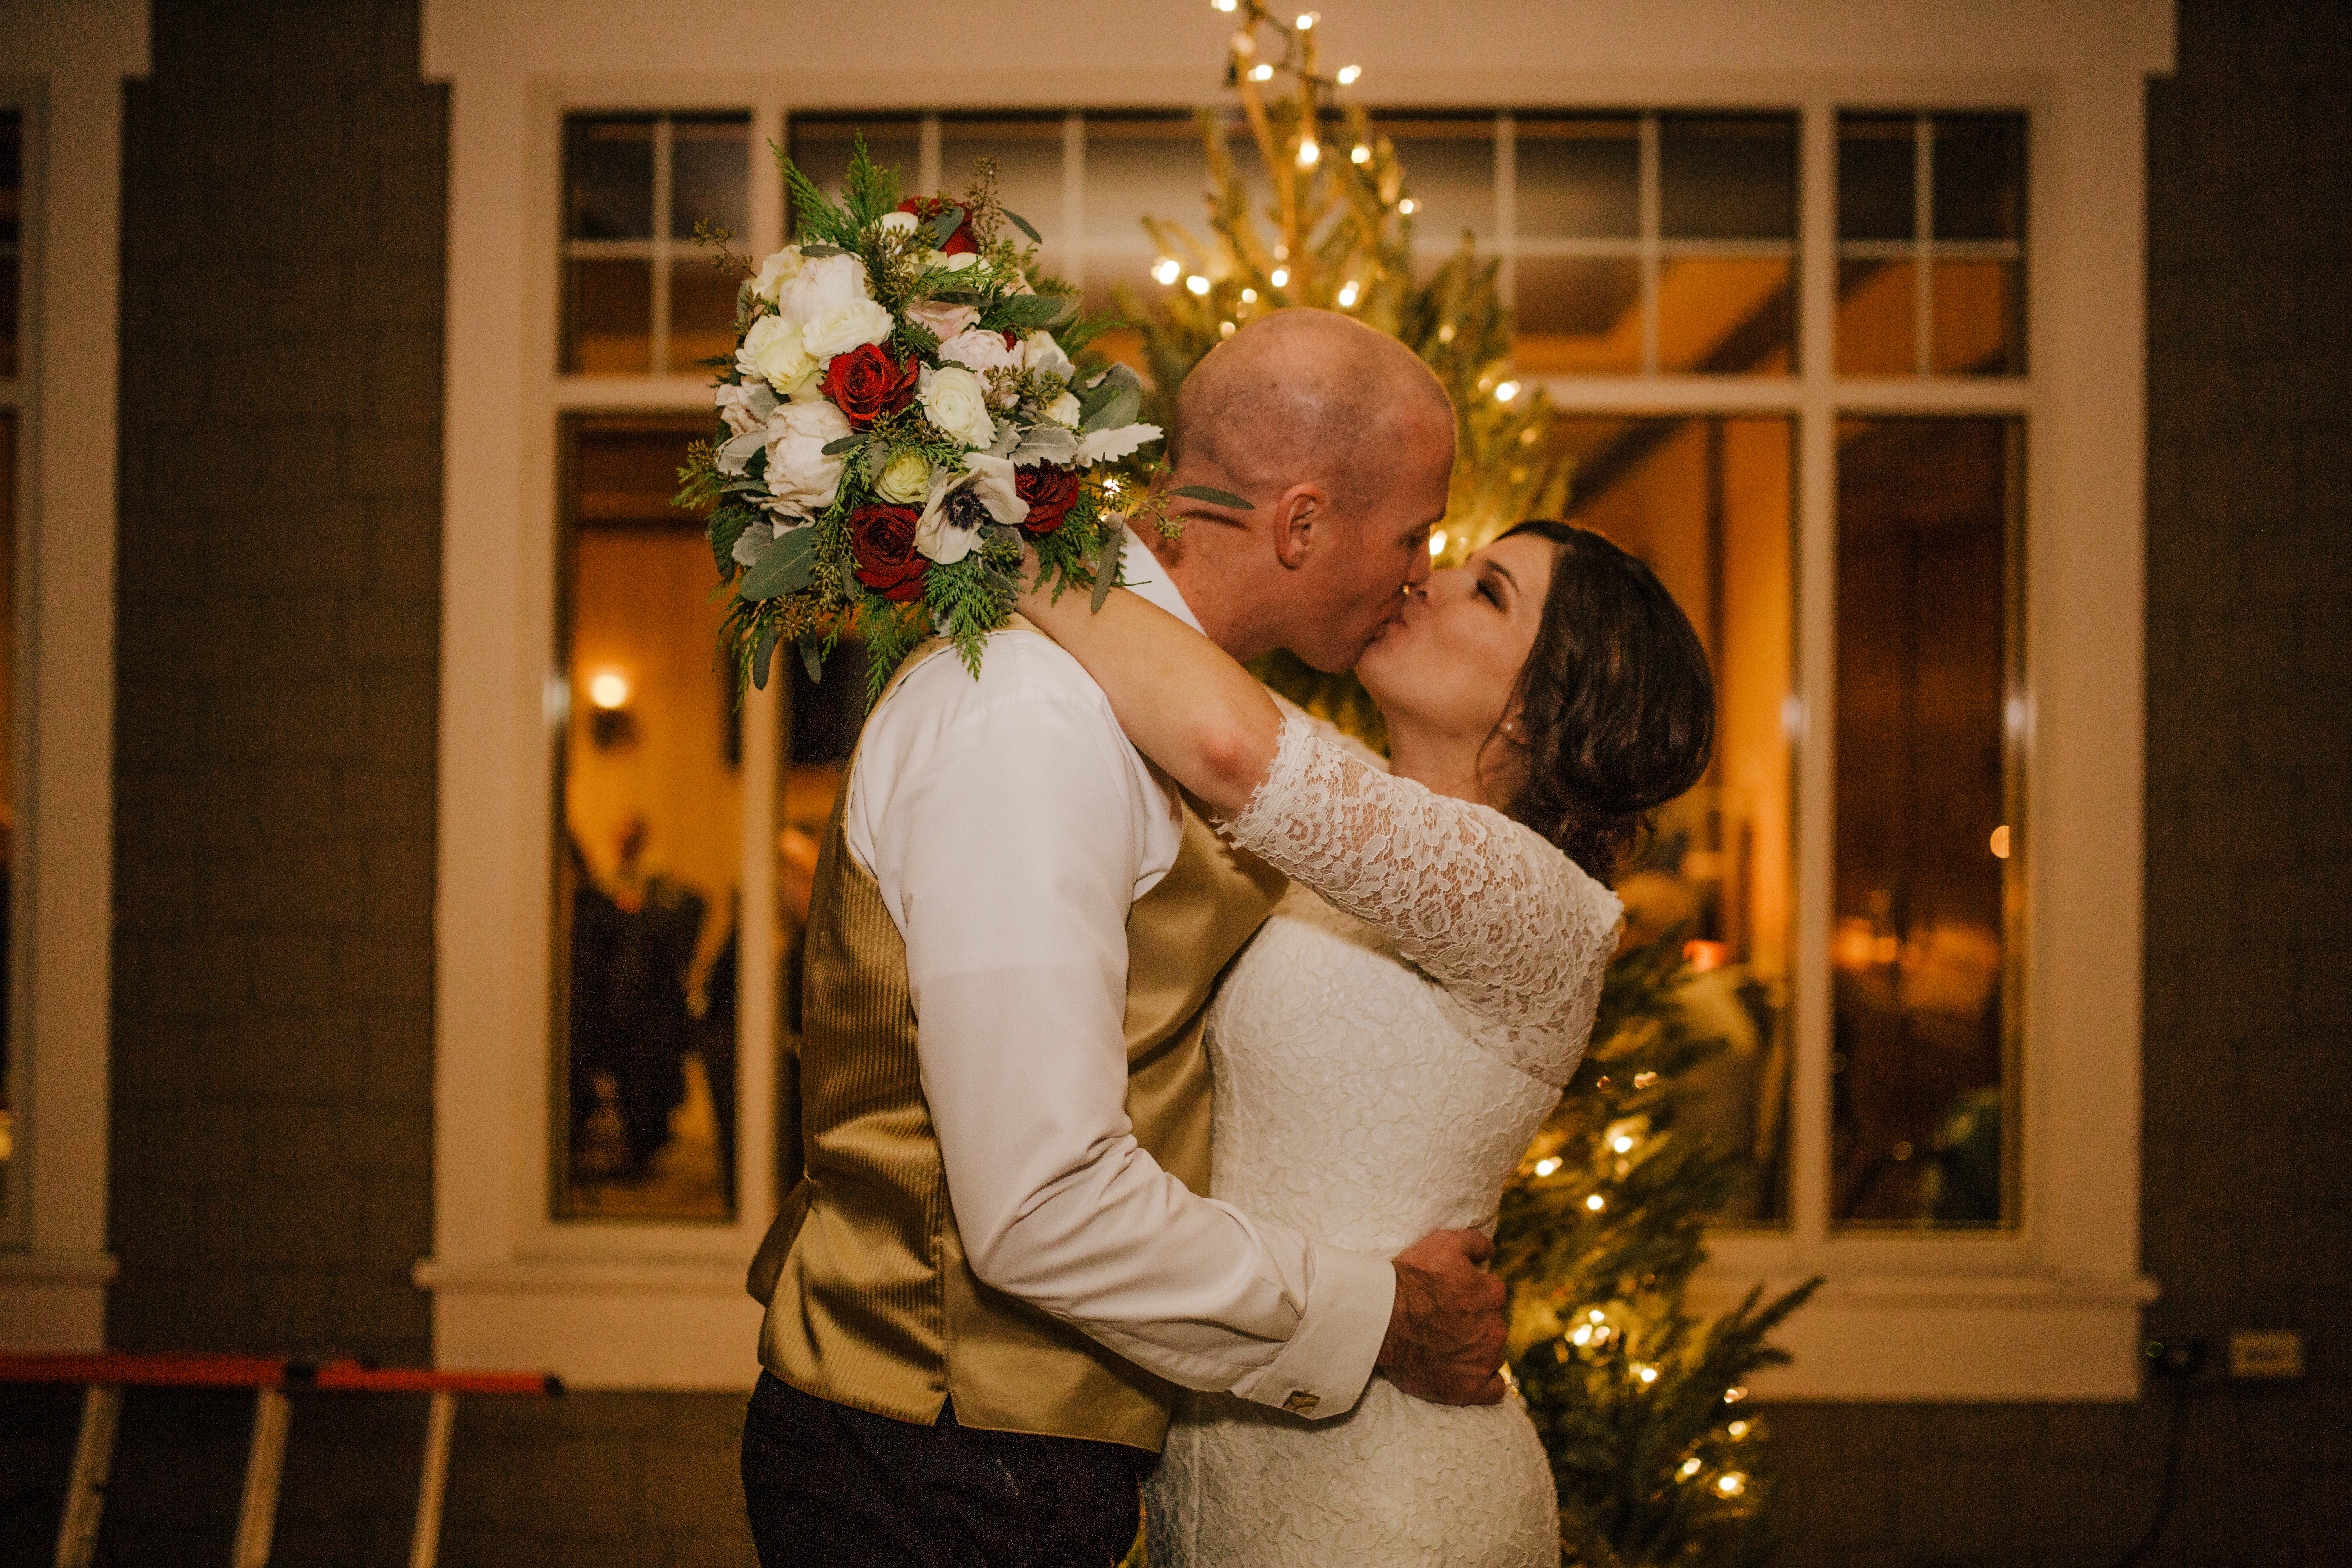 Mr. & Mrs. Daughters - Quail Hollow Country Club Wedding